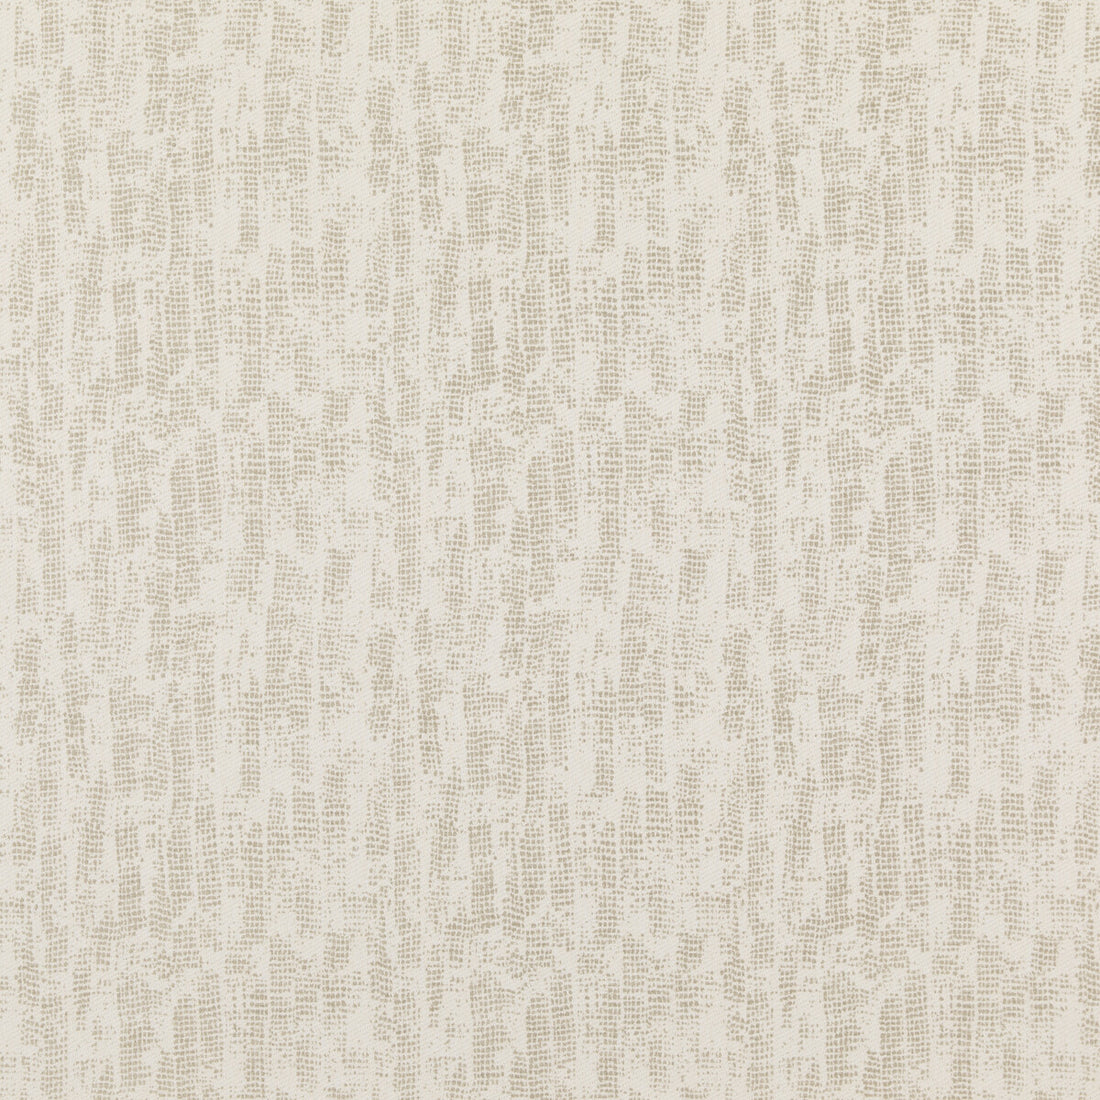 Verse fabric in ivory/ecru color - pattern GWF-3735.116.0 - by Lee Jofa Modern in the Kelly Wearstler IV collection